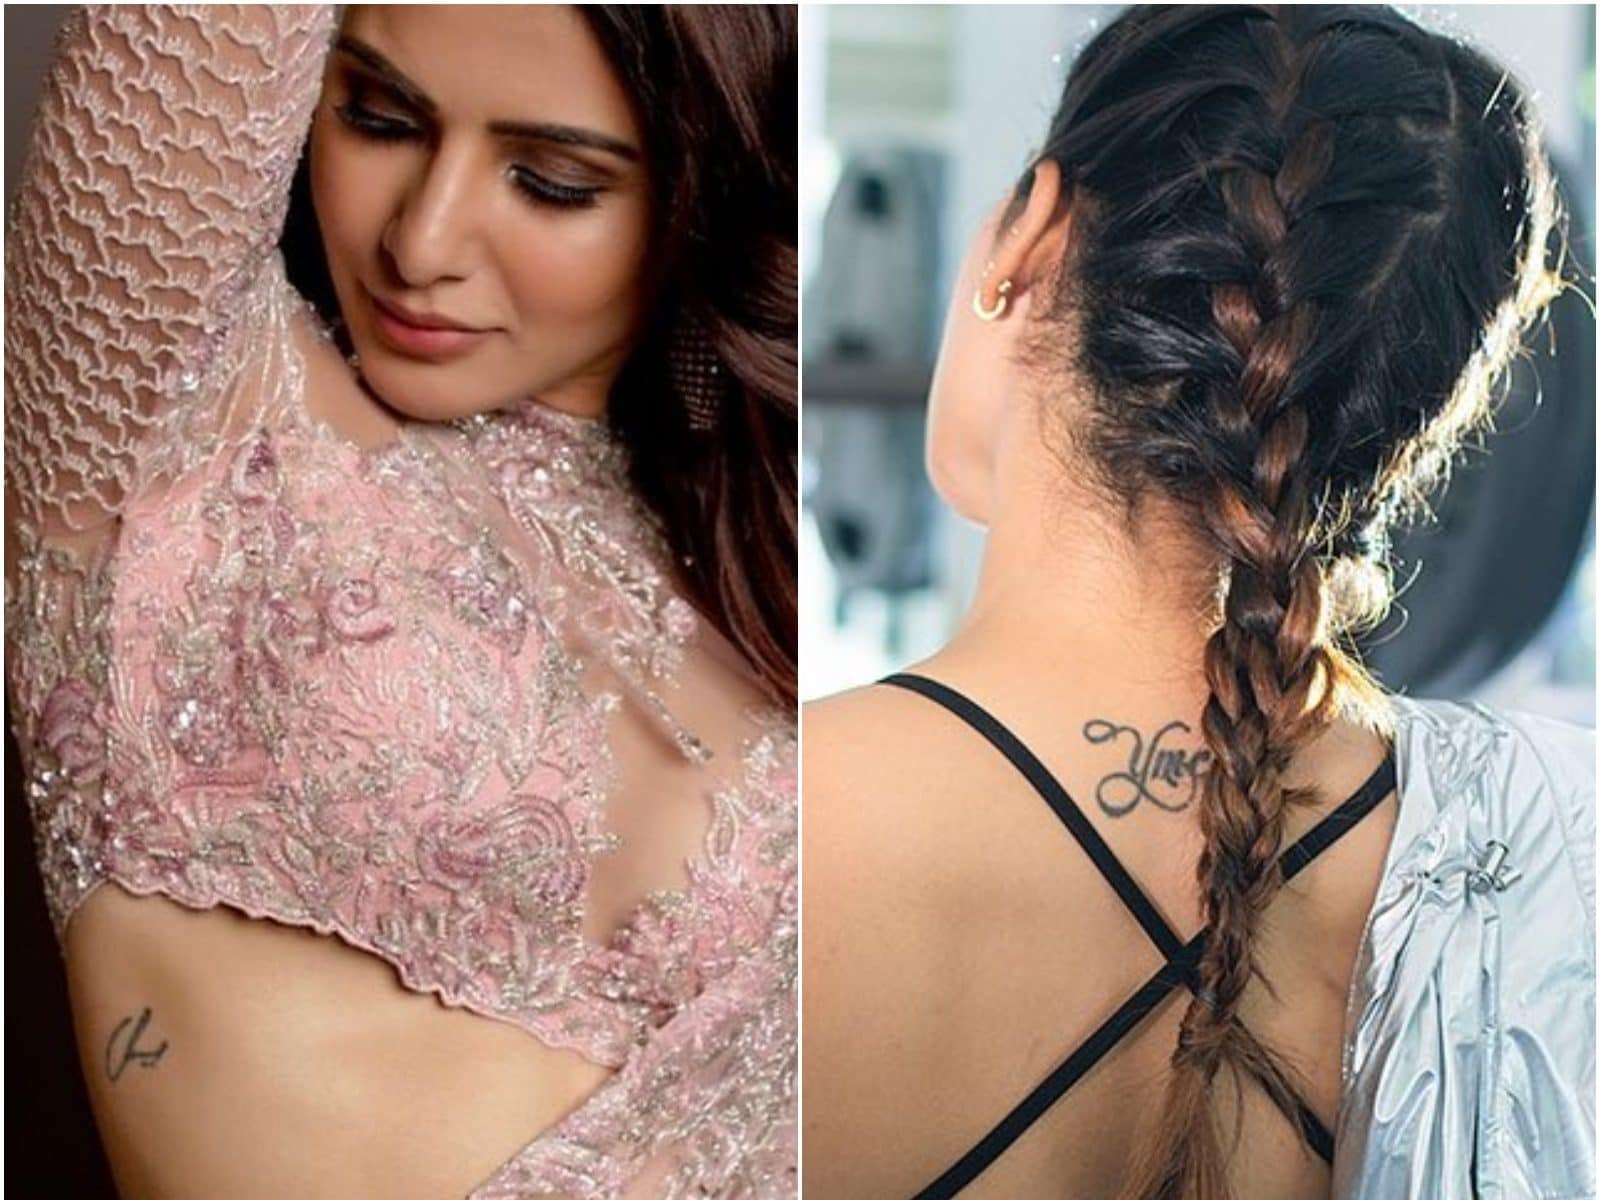 Samantha Akkineni's 3 Tattoos are All Connected to Naga Chaitanya. Find Out How